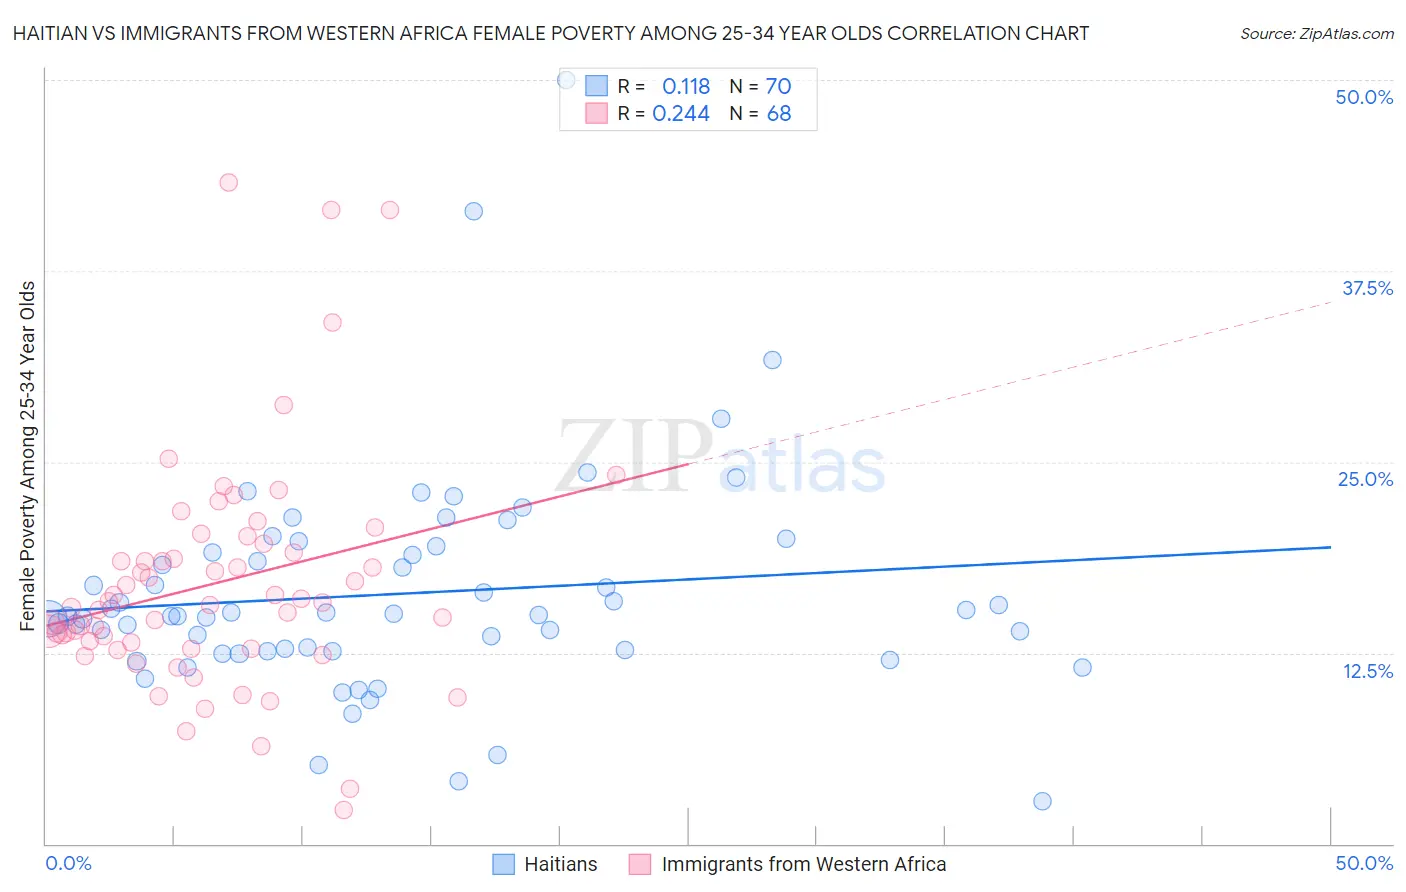 Haitian vs Immigrants from Western Africa Female Poverty Among 25-34 Year Olds